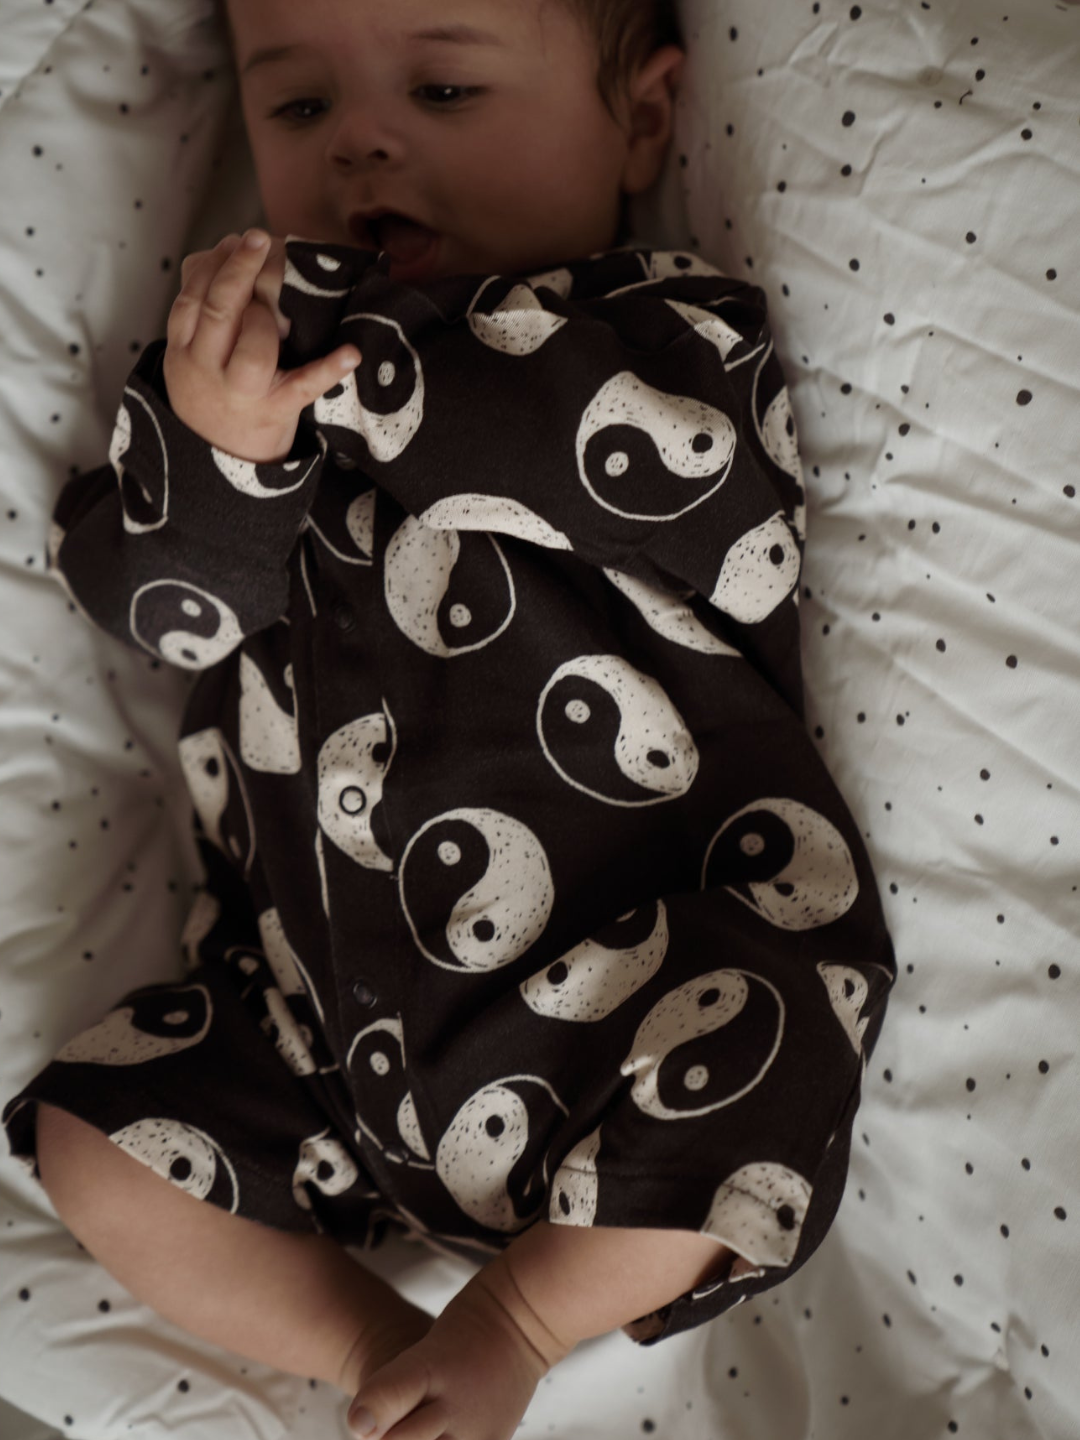 A front view of the roomy jumpsuit on a baby. Black with a yin and yang pattern all over. Front snap button closure.